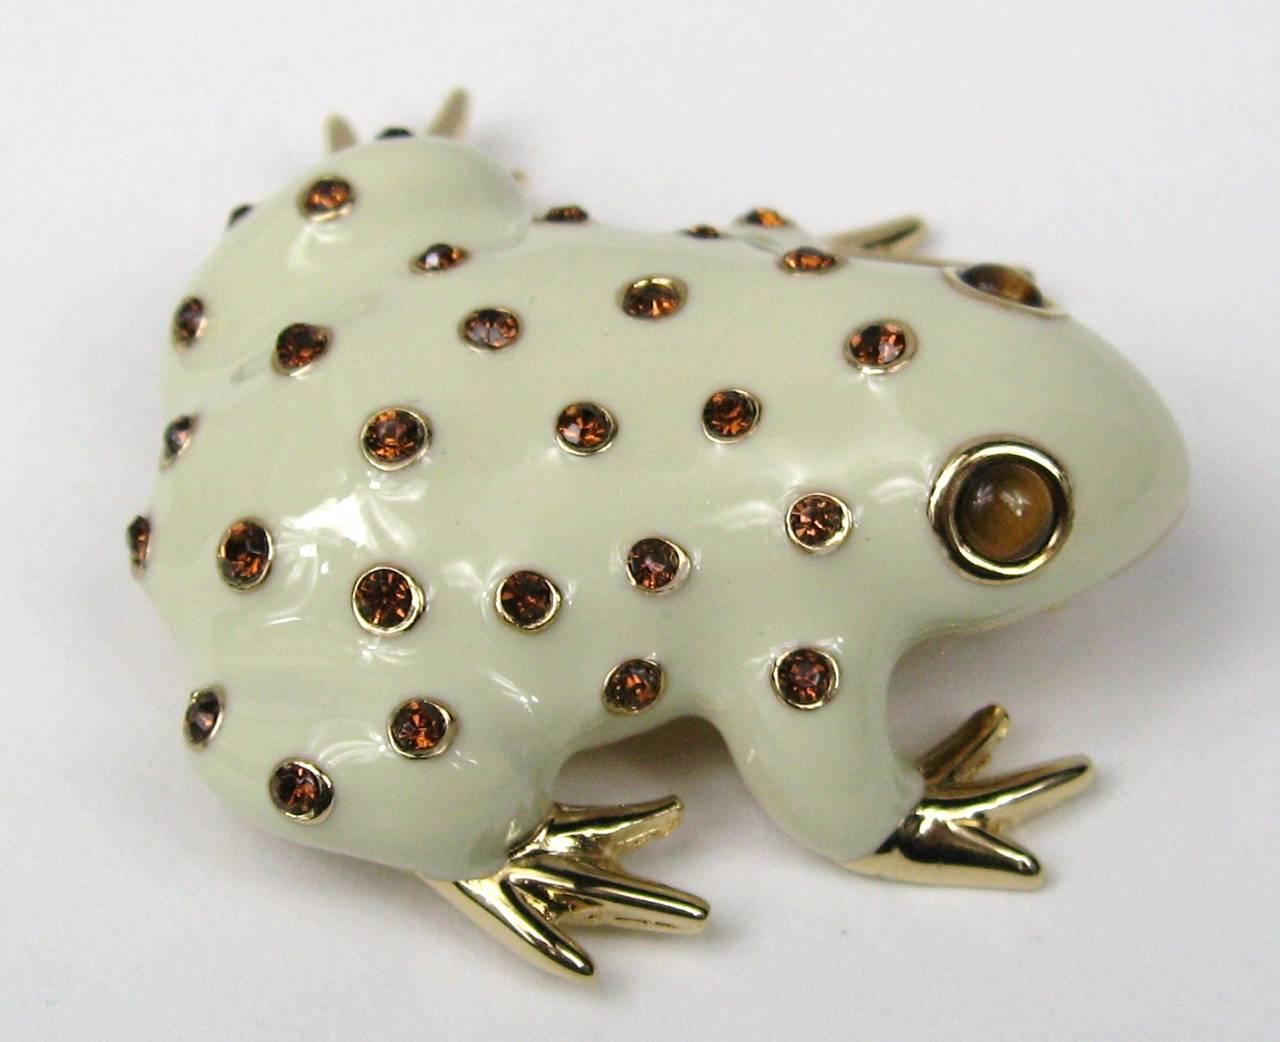 Enameled Beige with amber crystals Frog Brooch 
Ciner New Old Stock Tags still attached

Measures 1.77